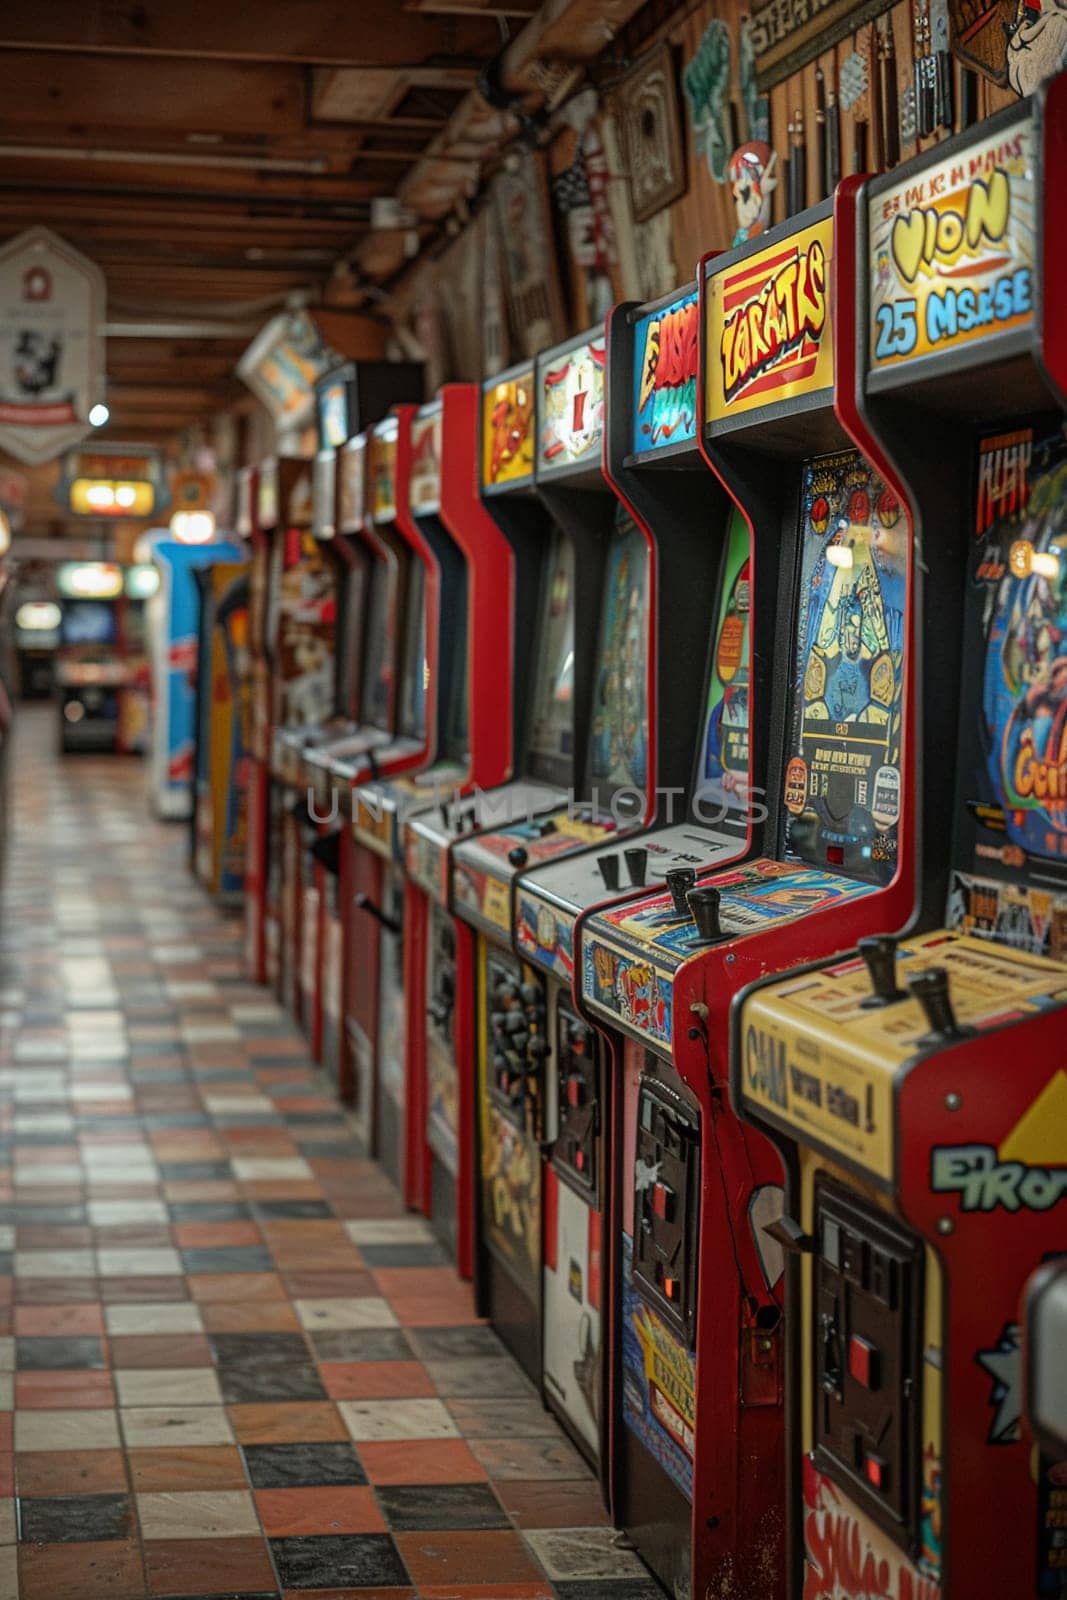 Classic Arcade Machines Replay Childhood in Business of Nostalgic Gaming, Arcade screens and pixelated graphics replay a story of childhood fun and games in the classic arcade machine business.